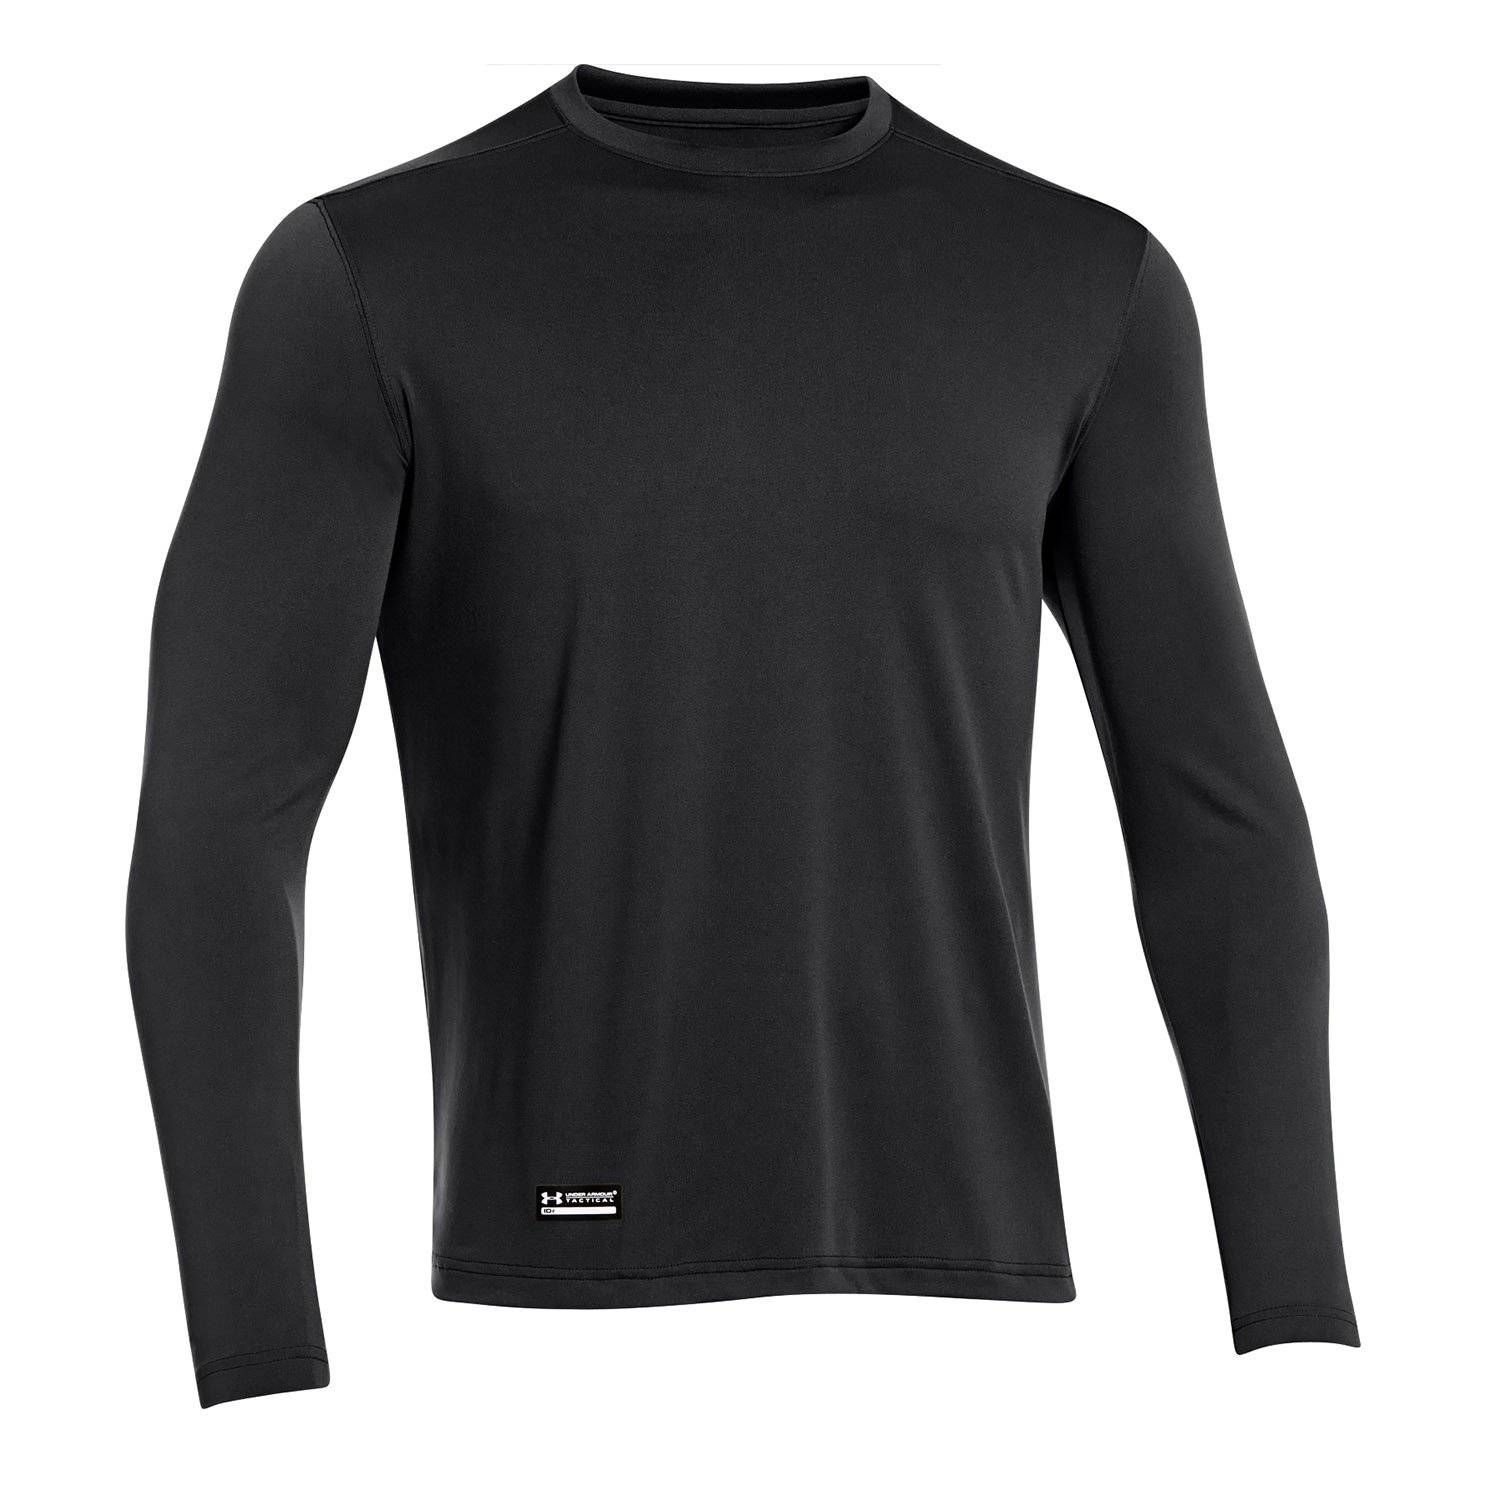 Under Armour Men UA TAC Tech Long Sleeve Tee Sports T-Shirt made with Anti-Odour Technology Gym Clothes with a Comfortable Fit 